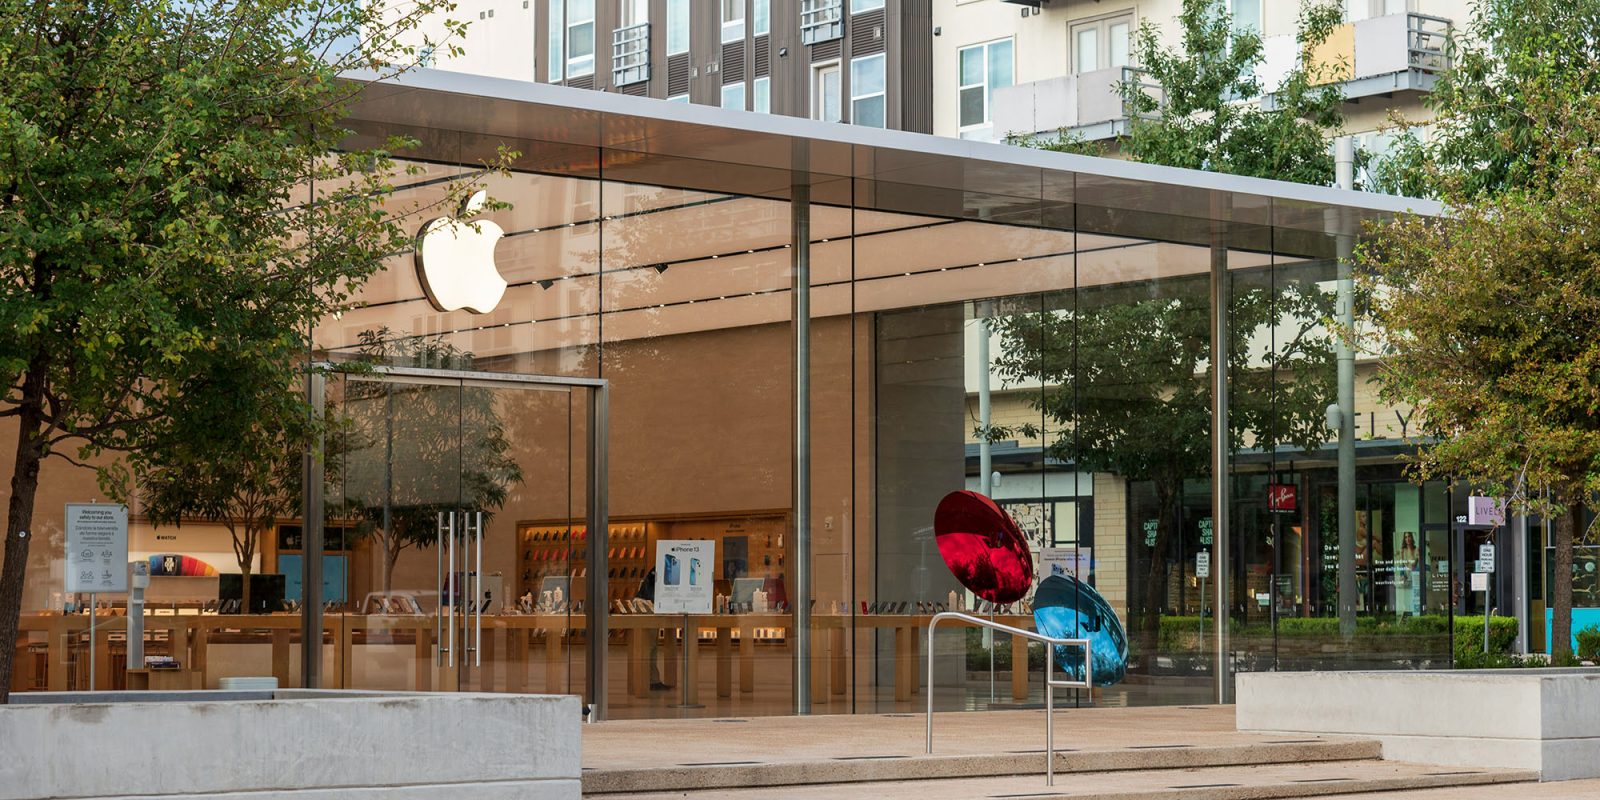 Another iPhone record set | Apple Store frontage